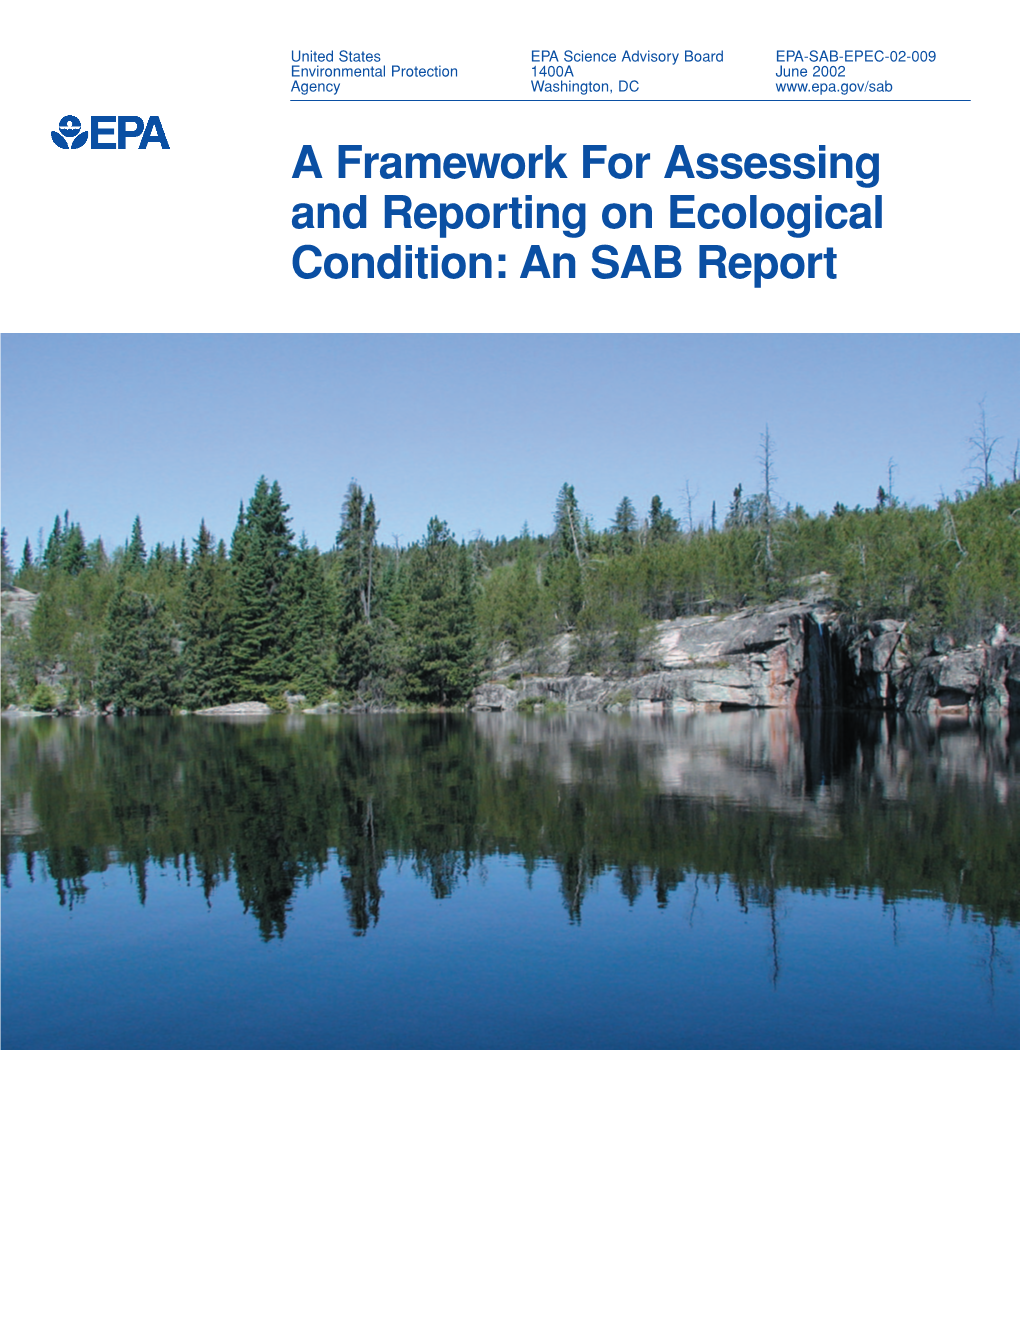 A Framework for Assessing and Reporting on Ecological Condition: an SAB Report the EPA Science Advisory Board (SAB) of the U.S